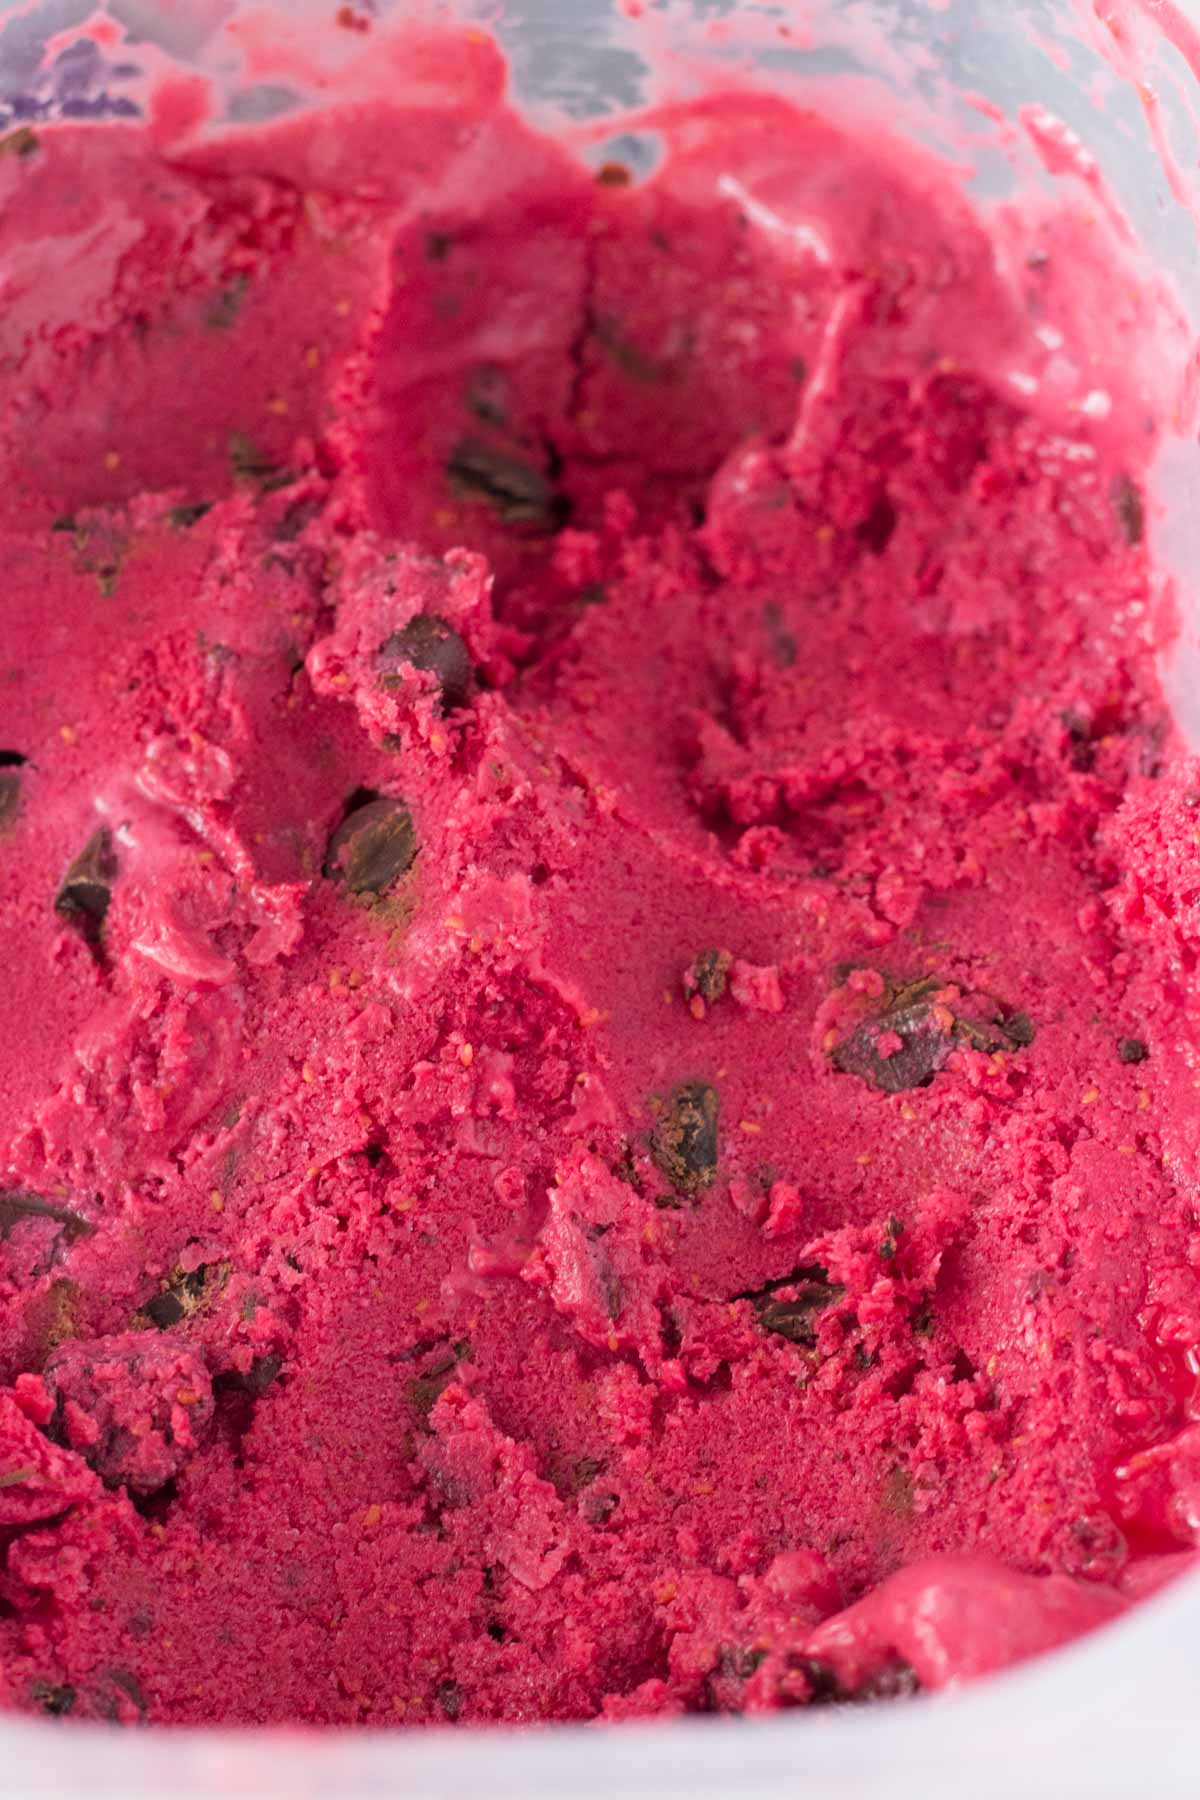 Cold, creamy Dark Chocolate Raspberry Frozen Yogurt. With no refined sugars & made without an ice cream maker, this no-churn frozen yogurt is the perfect way to cool off!